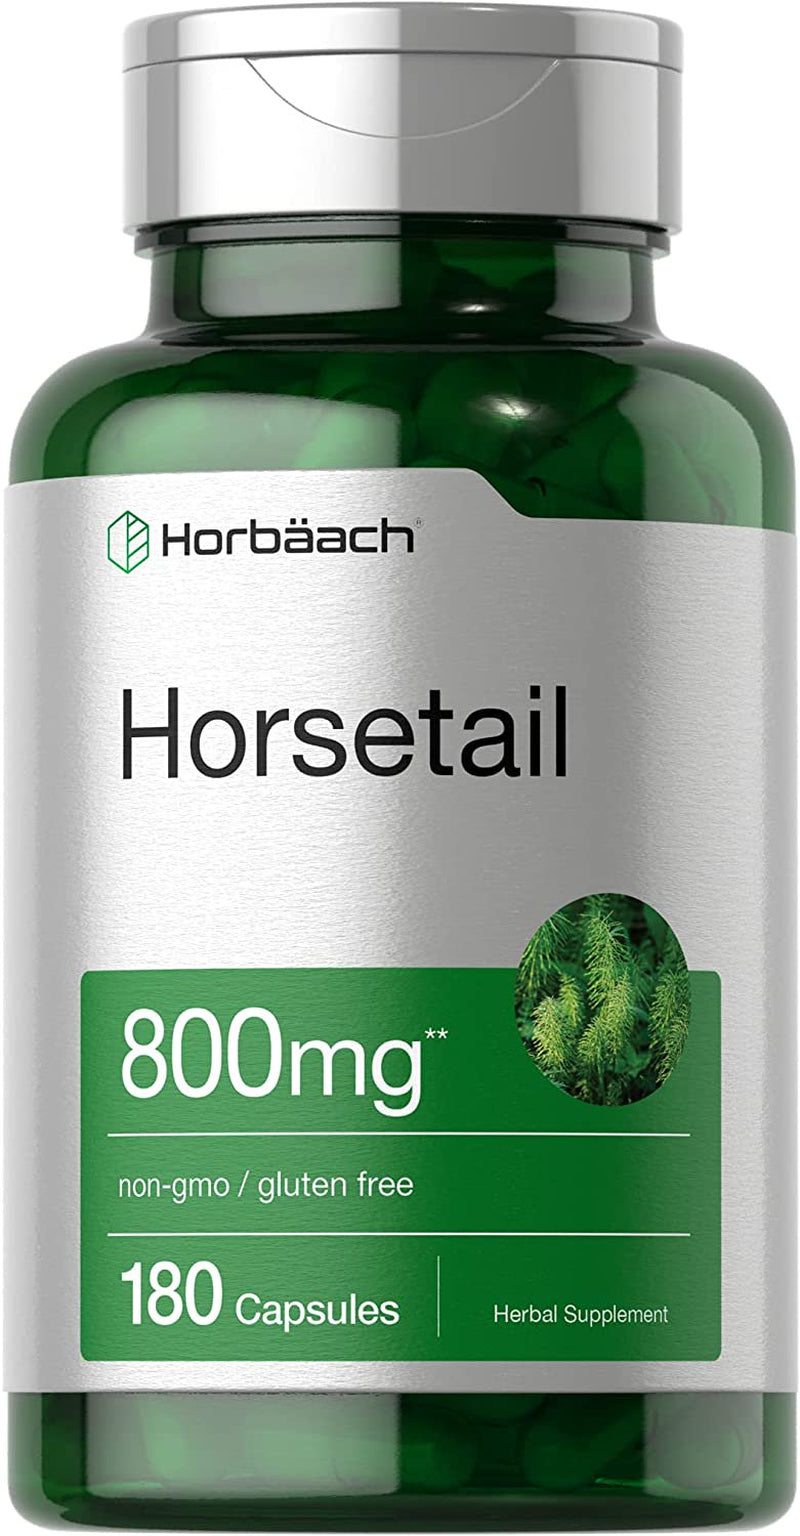 Horsetail Extract 800Mg | 180 Capsules | Herbal Supplement | by Horbaach